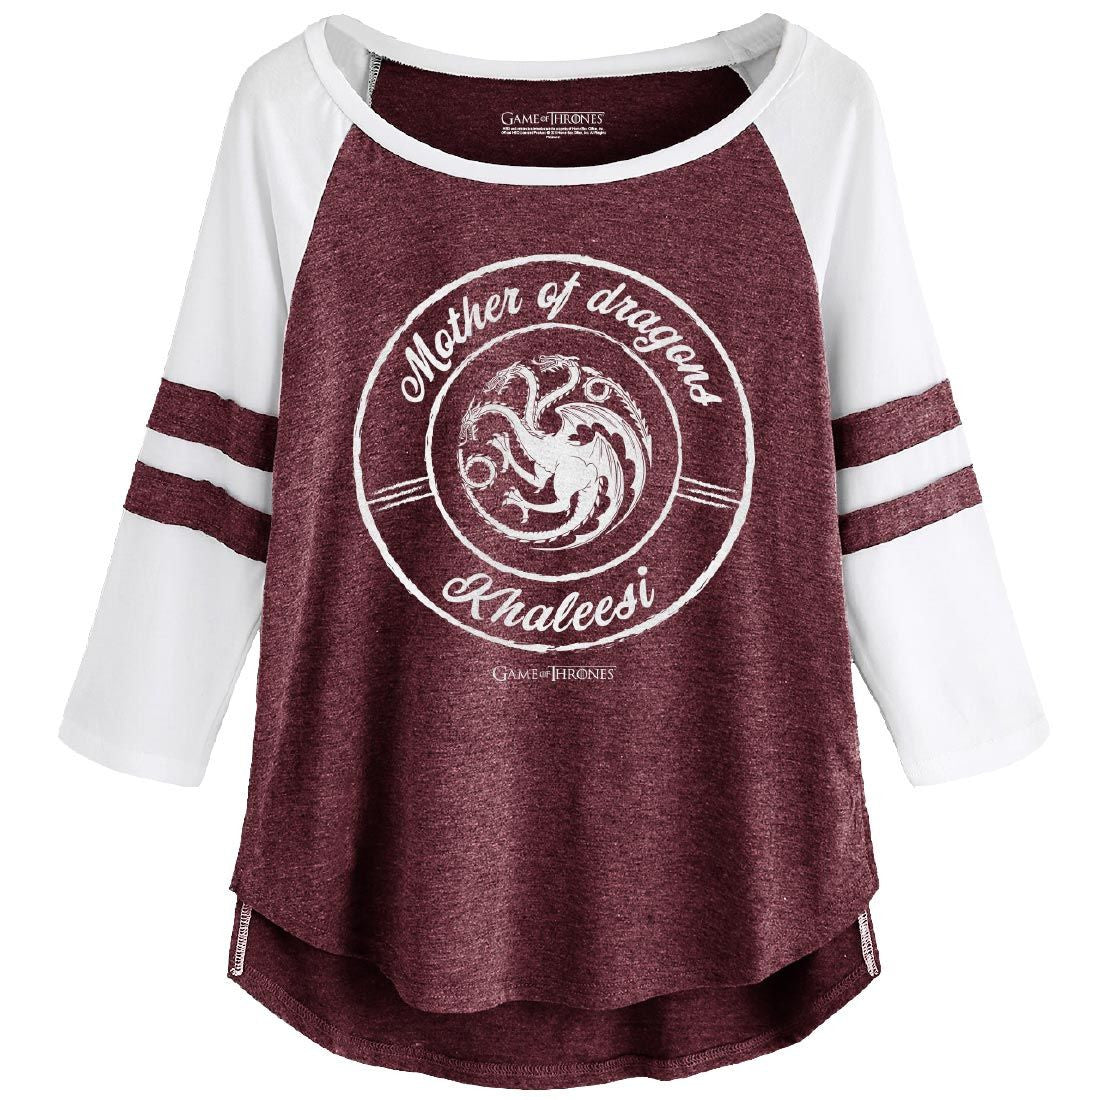 Game of Thrones Women's T-shirt - Mother of Dragons